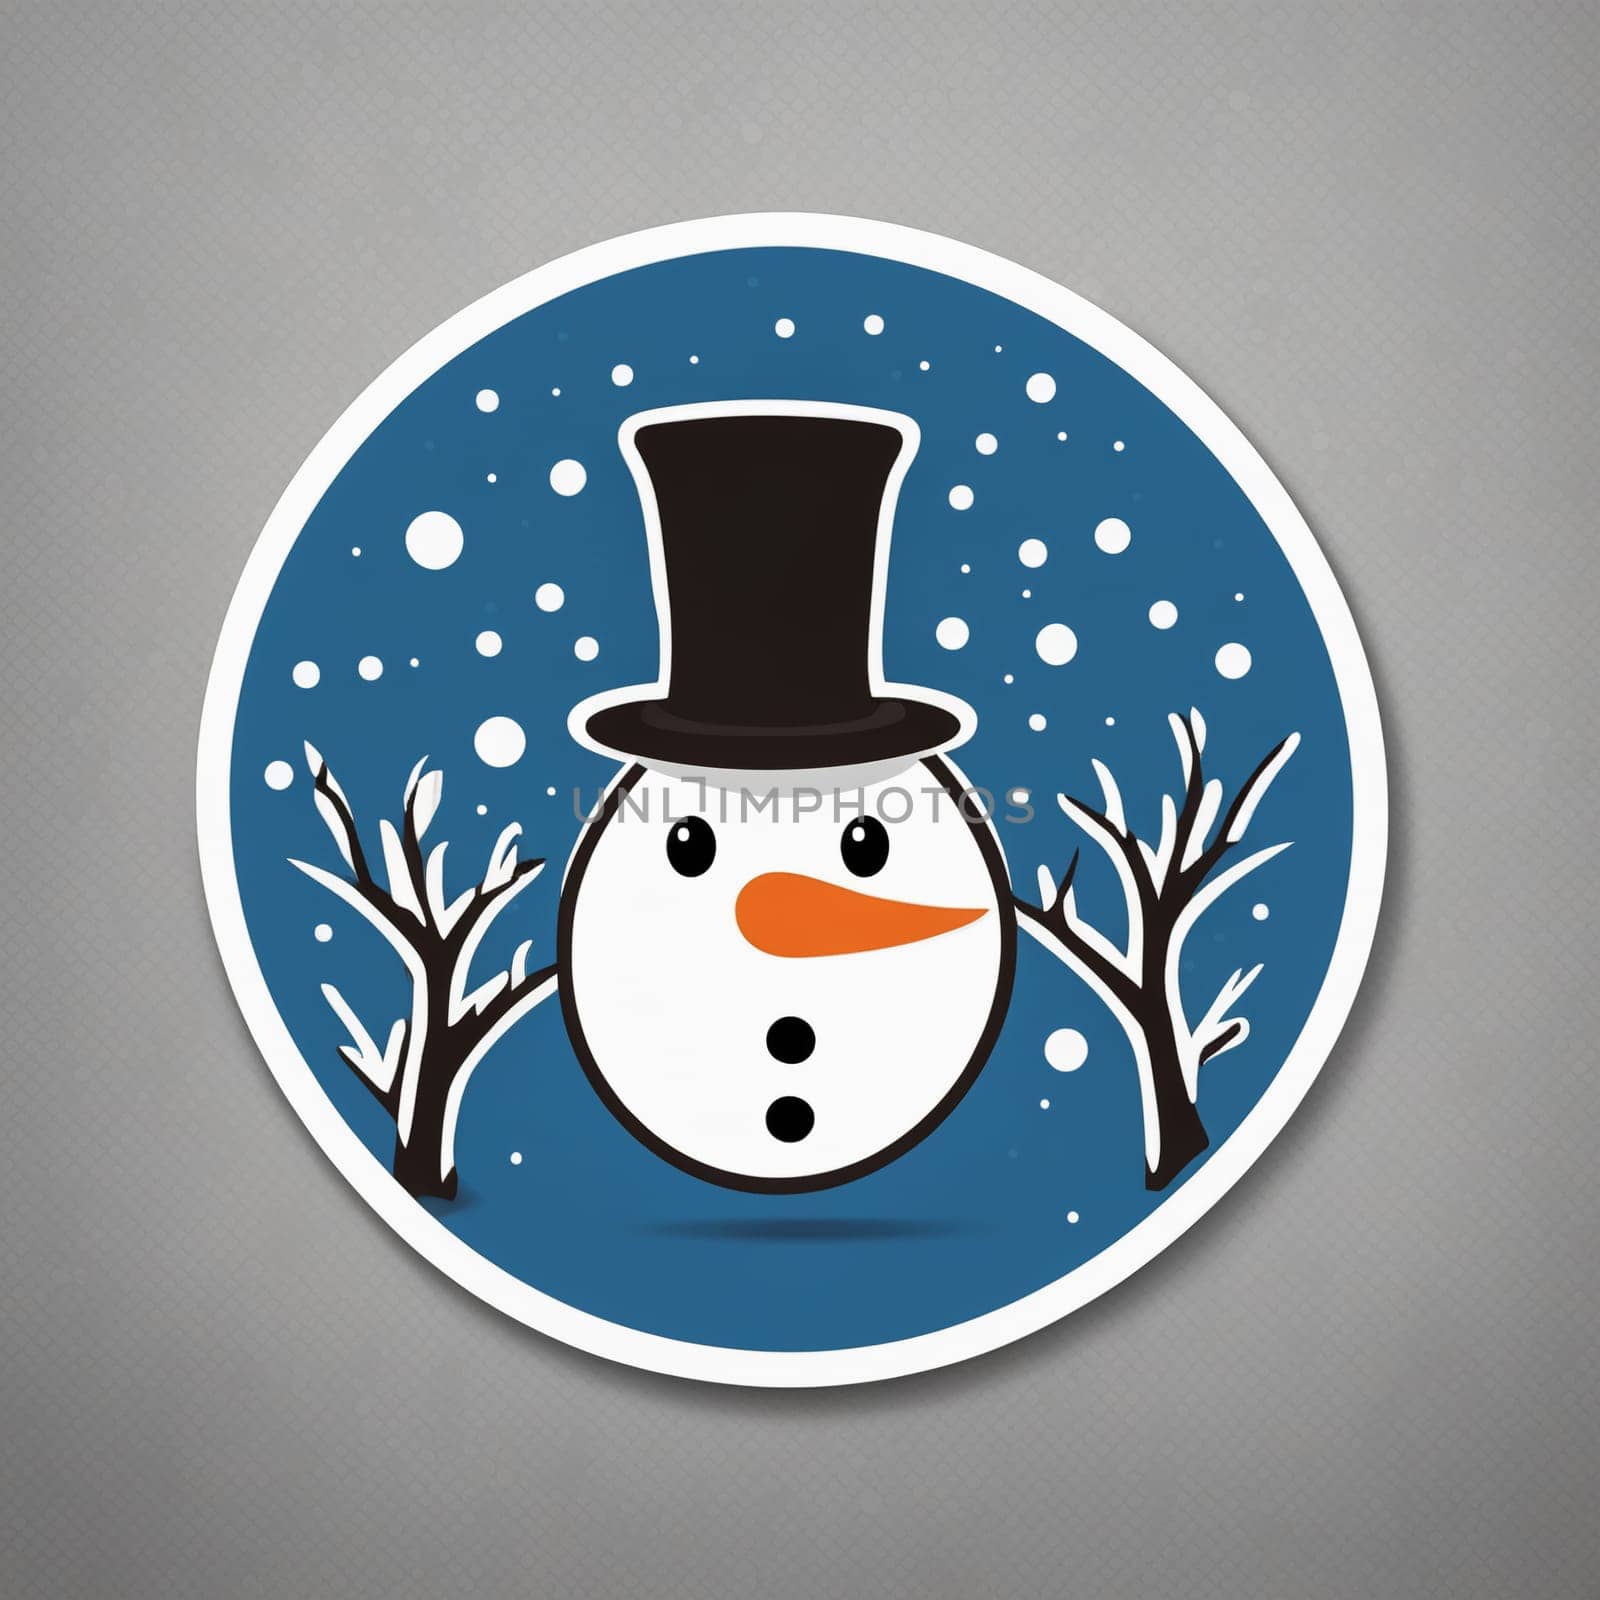 Round logo with snowman, cute character, white and blue colors. by Annu1tochka